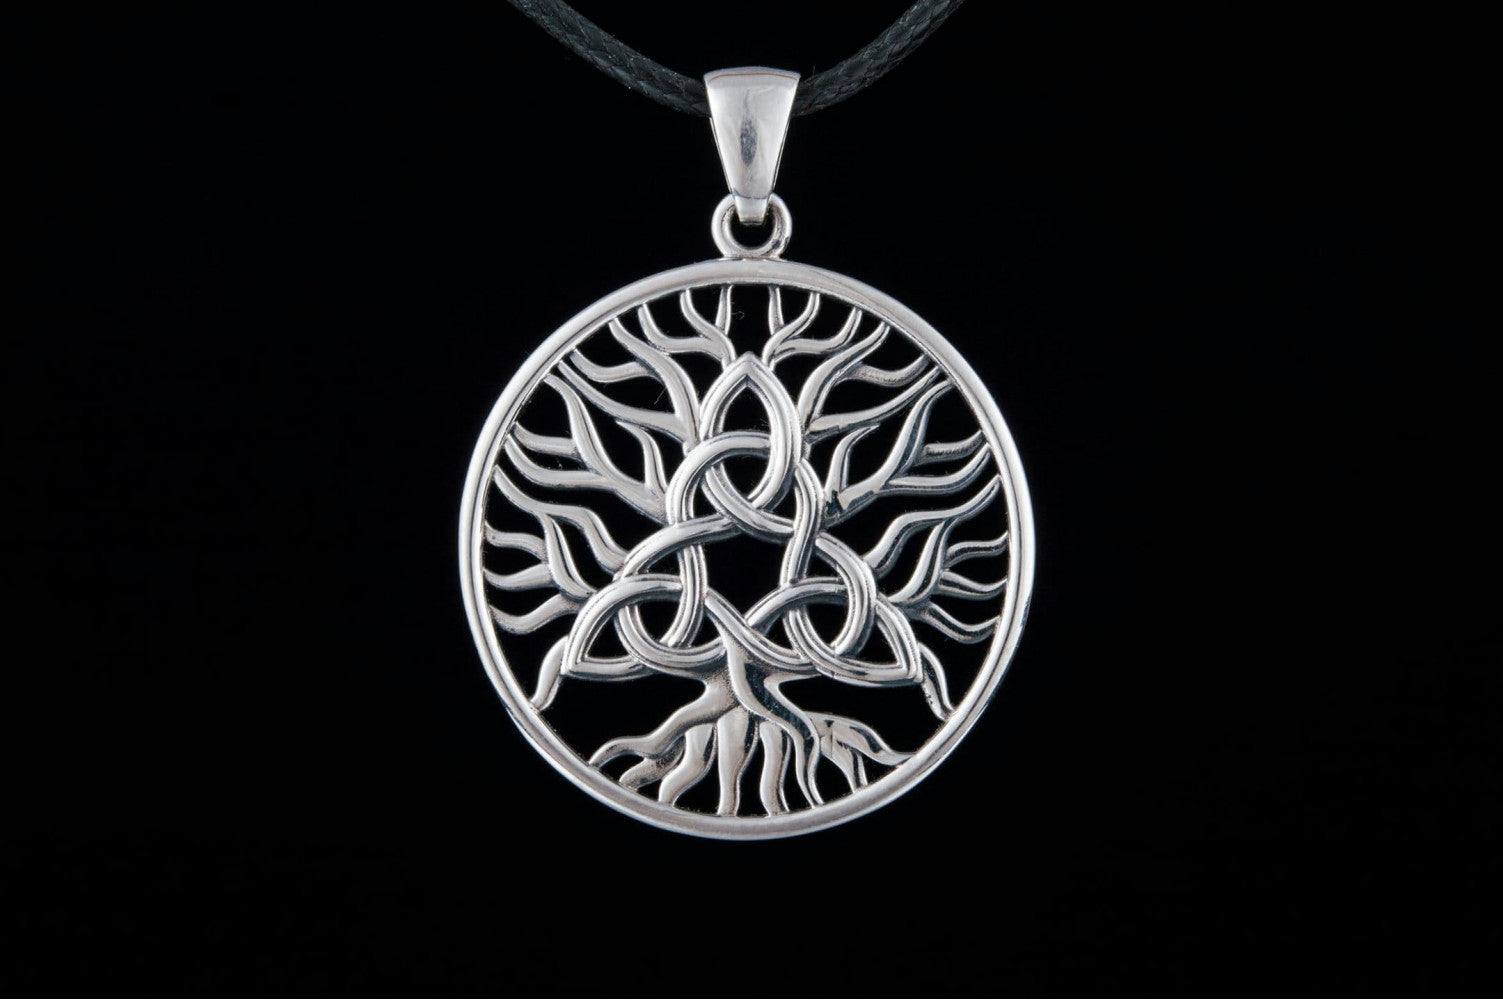 Yggdrasil with Triquetra Symbol Pendant Sterling Silver Viking Jewelry